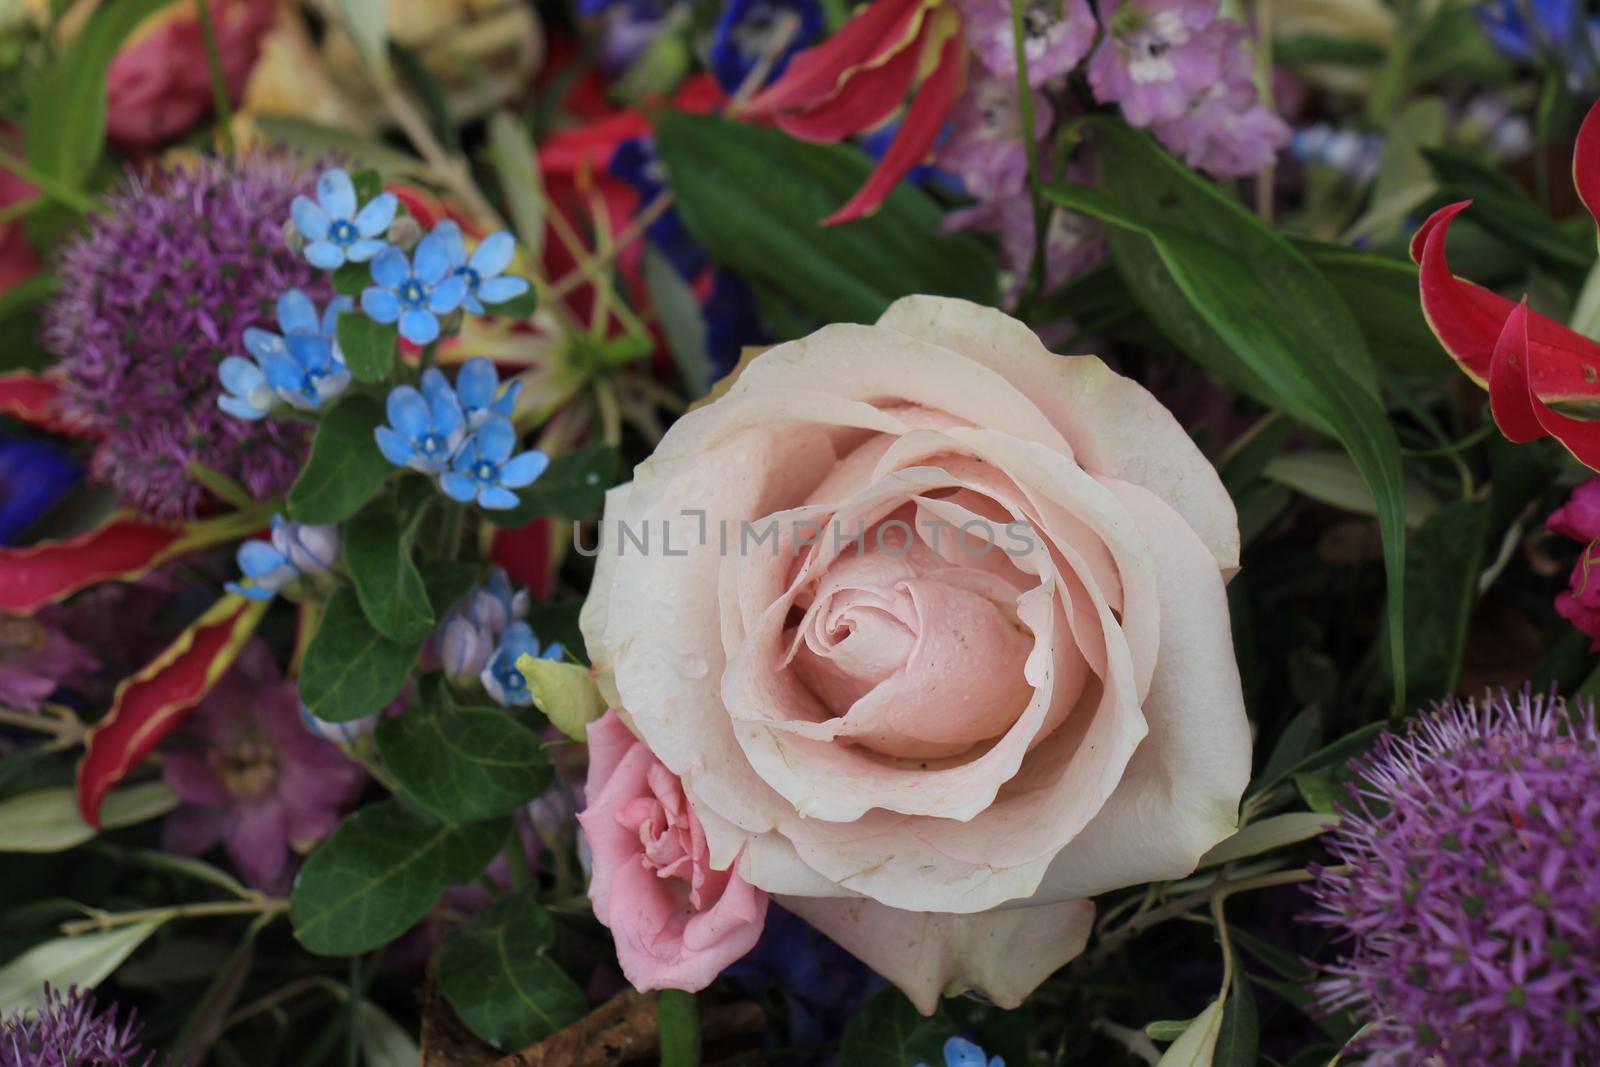 Big purple rose in a floral wedding decoration with small blue and purple flowers by studioportosabbia